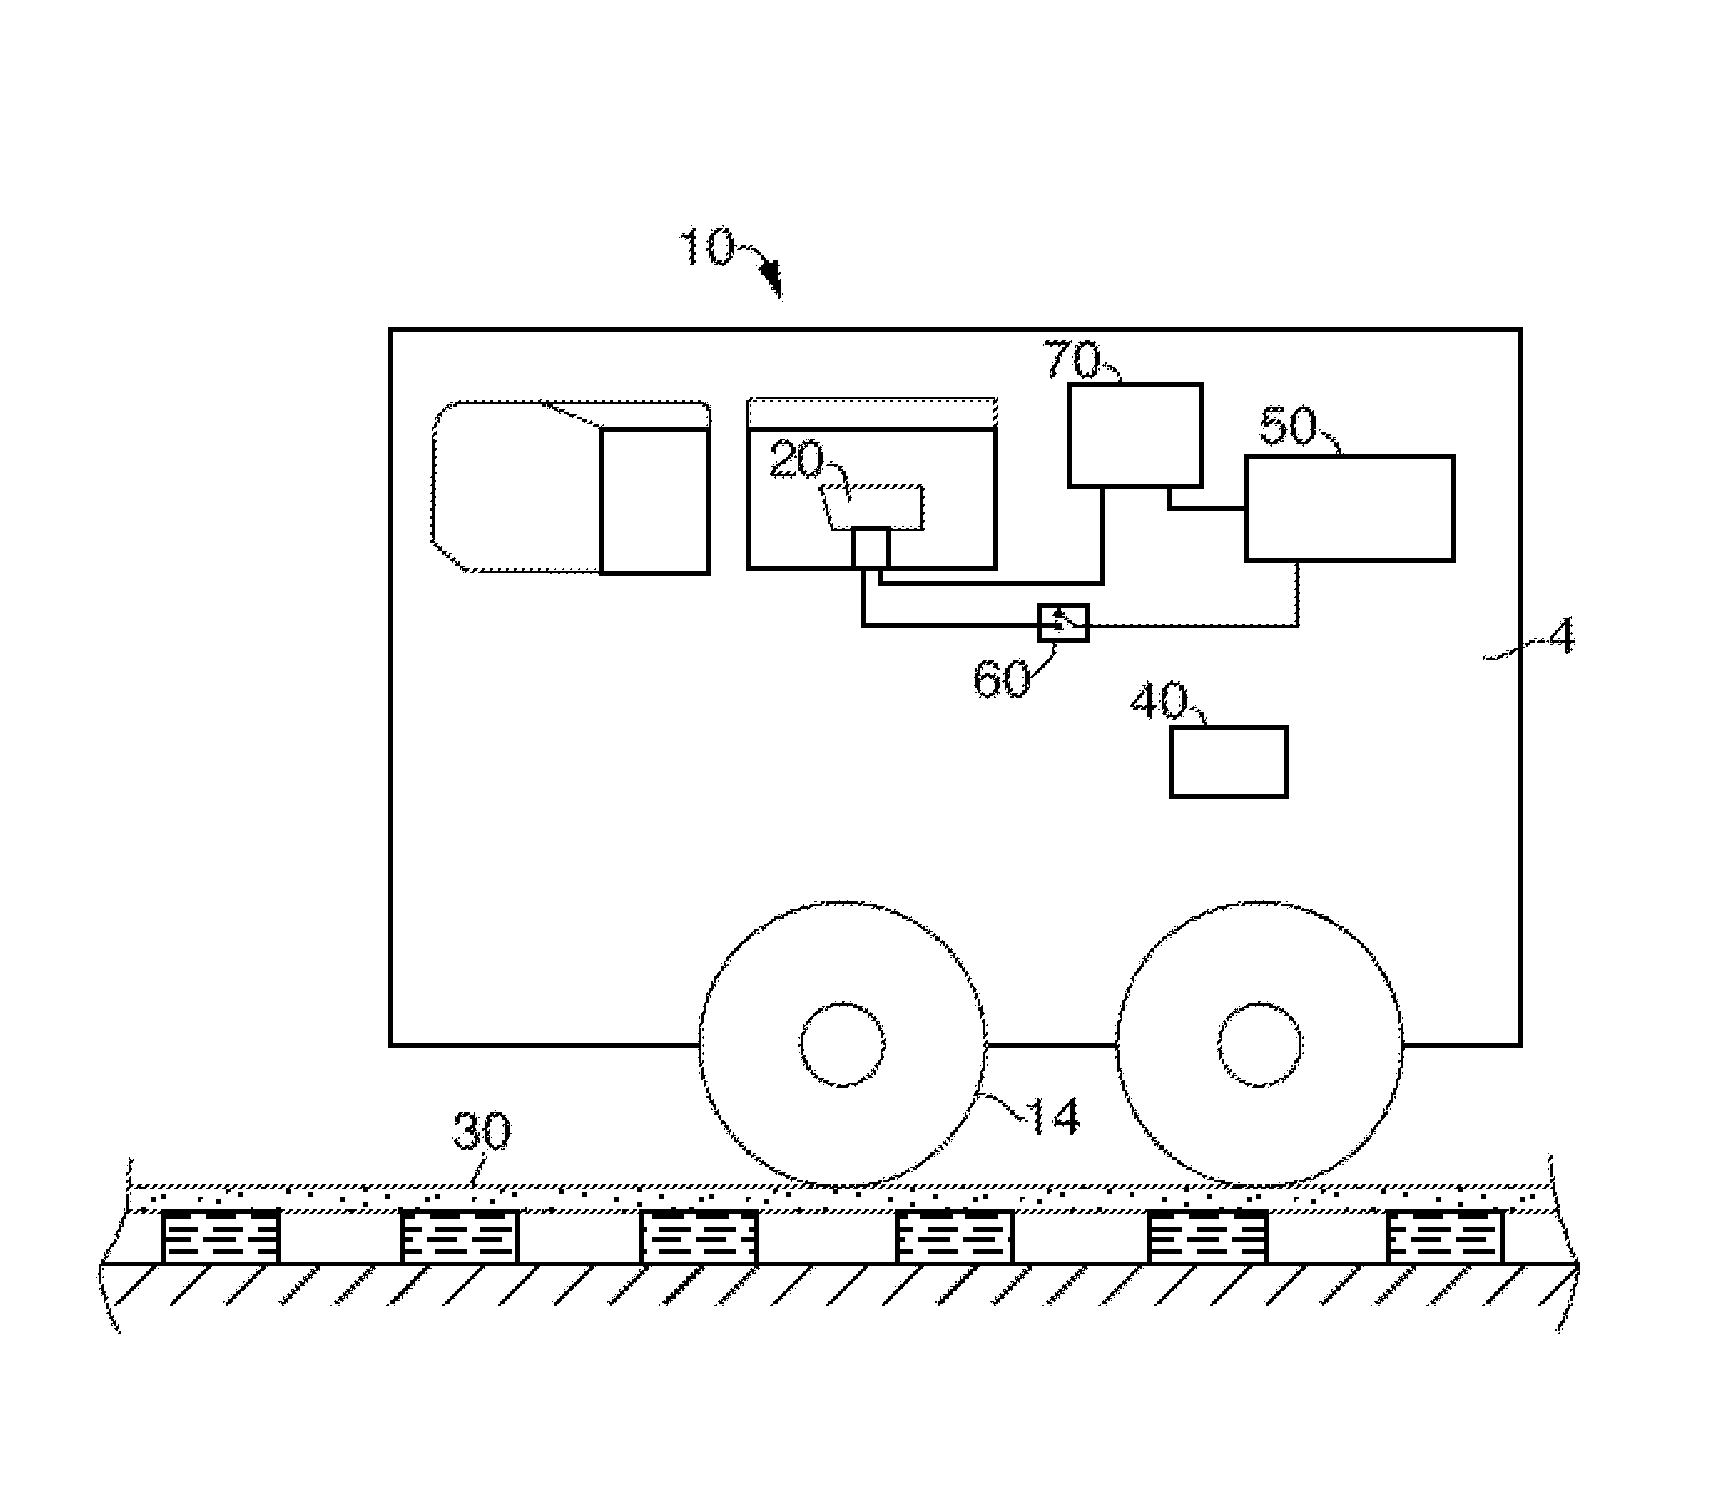 System and method for inspection of wayside rail equipment